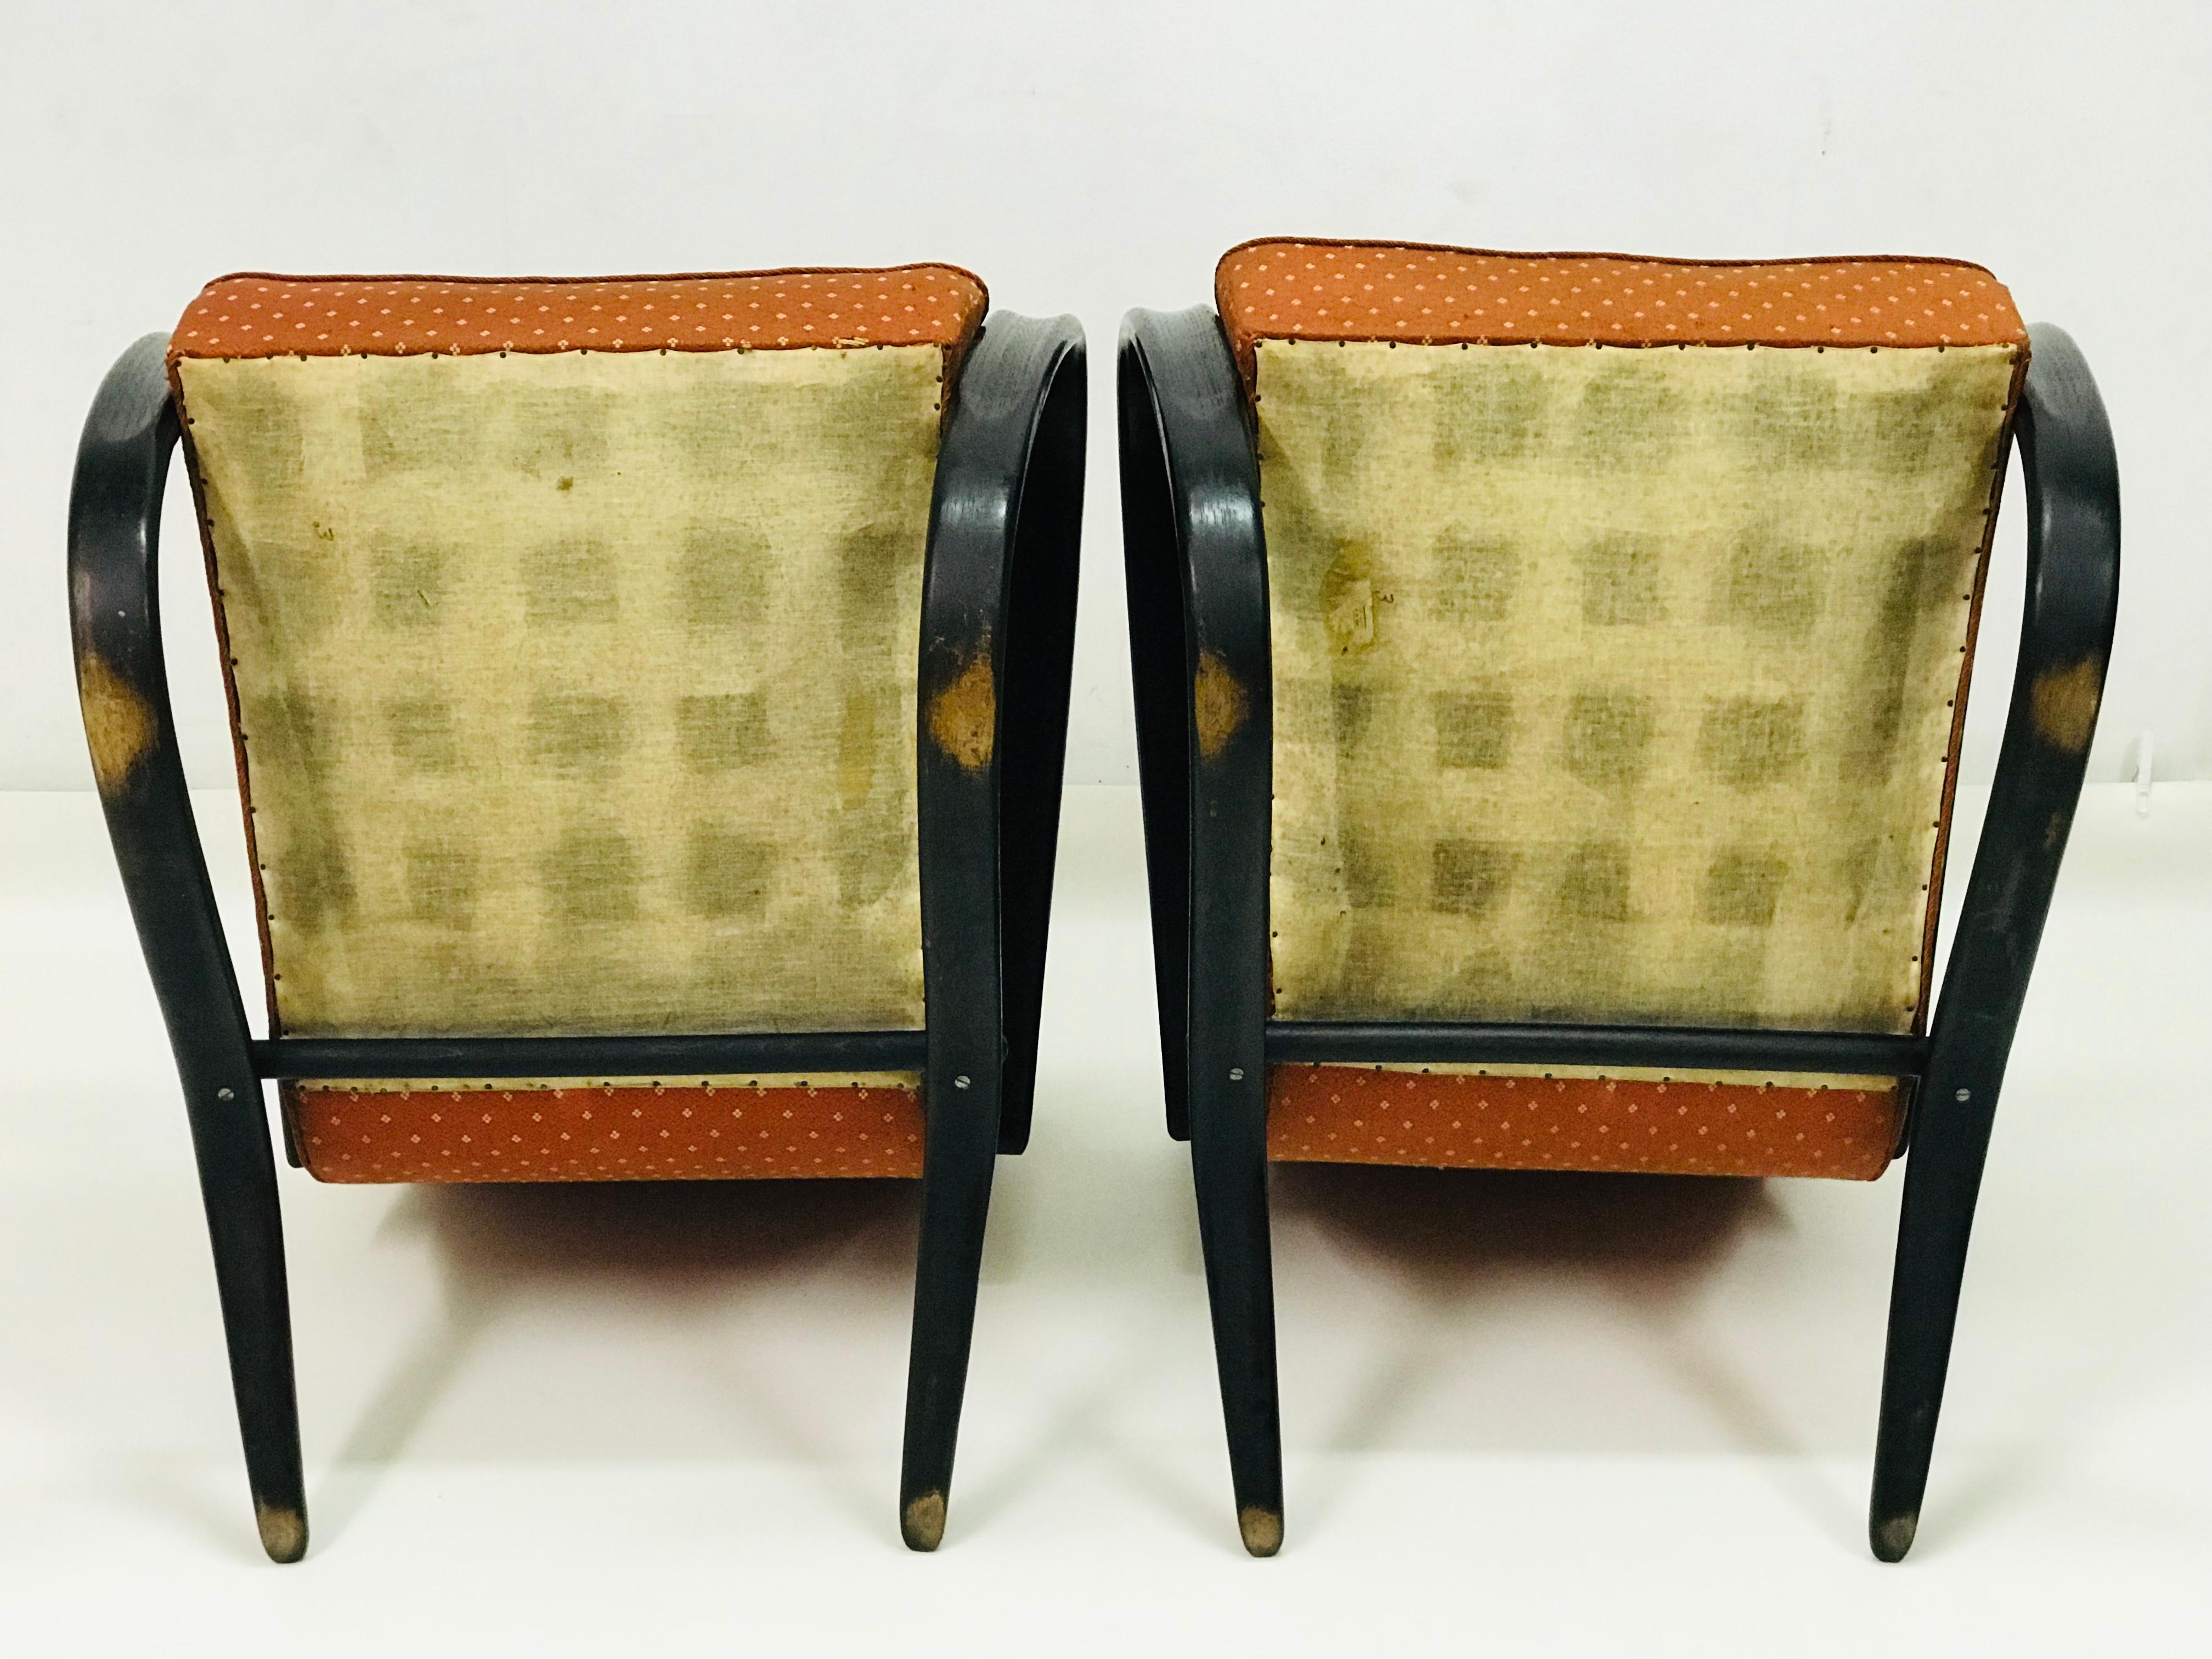 Pair of Armchairs by J. Halabala 1930, Model H-269 For Sale 3